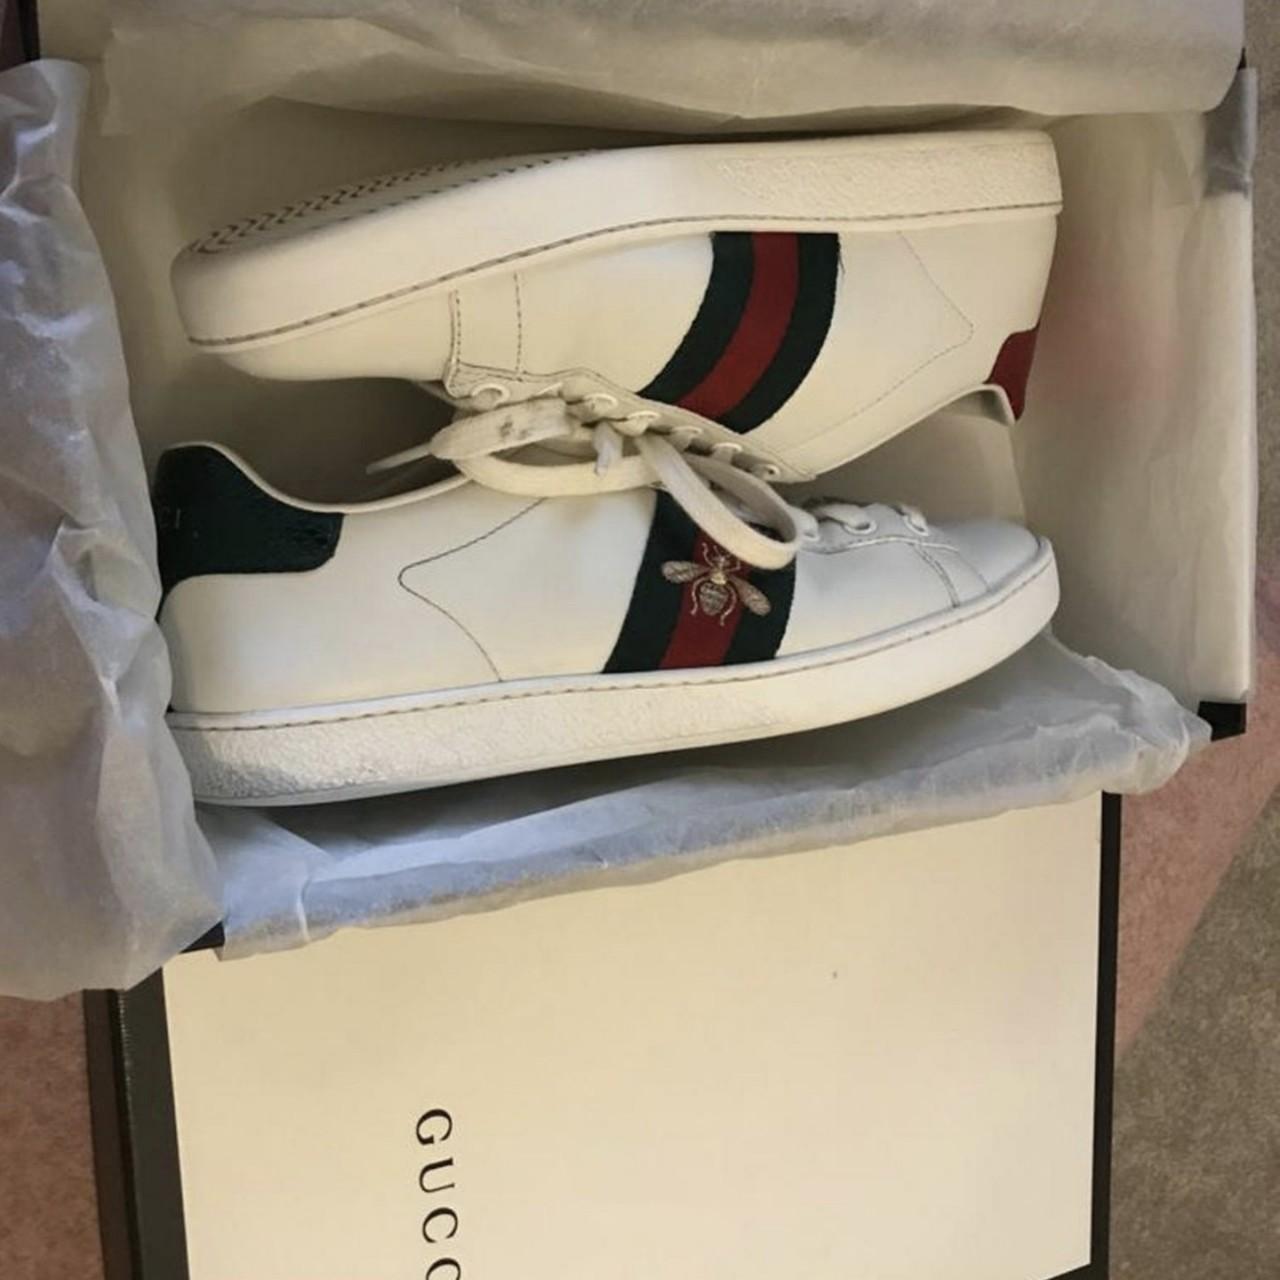 GUCCI Ace bee sneakers, size UK 6 in good condition.... - Depop